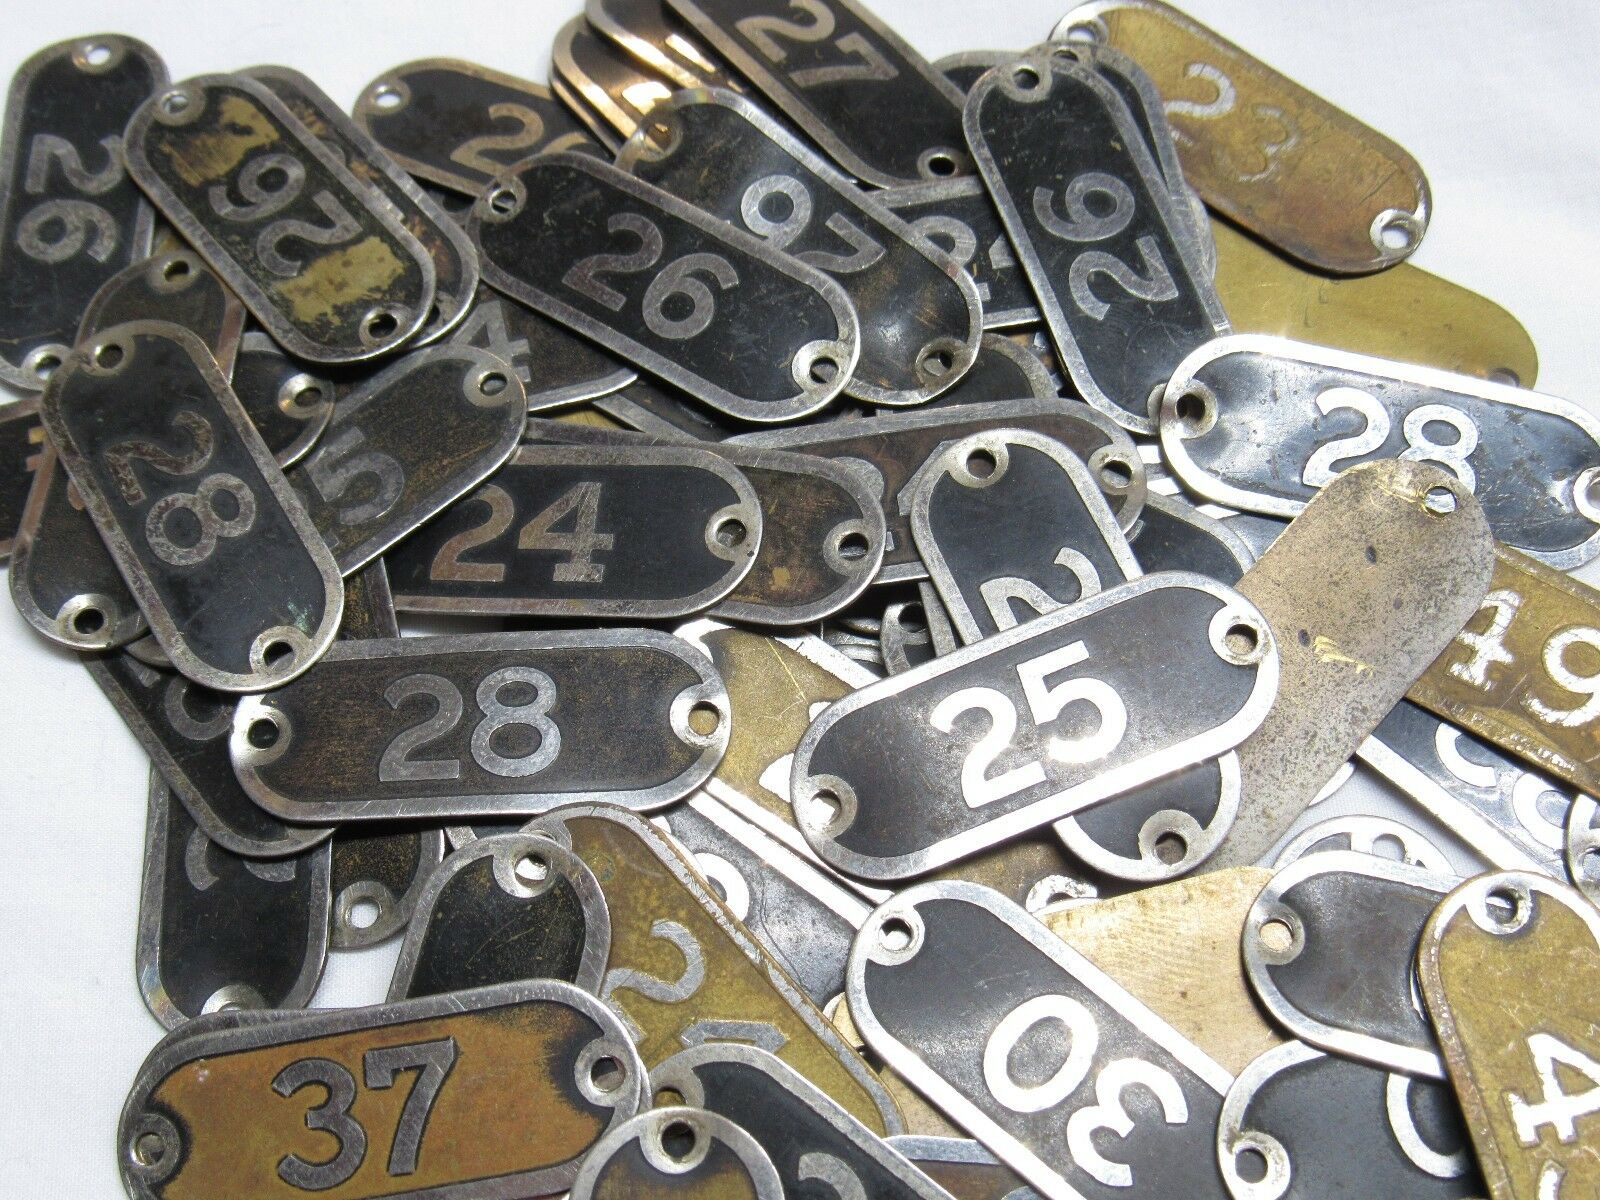 You Pick # Brass Number Seating Locker Basket Drawer Tags Plate Type 9 9a